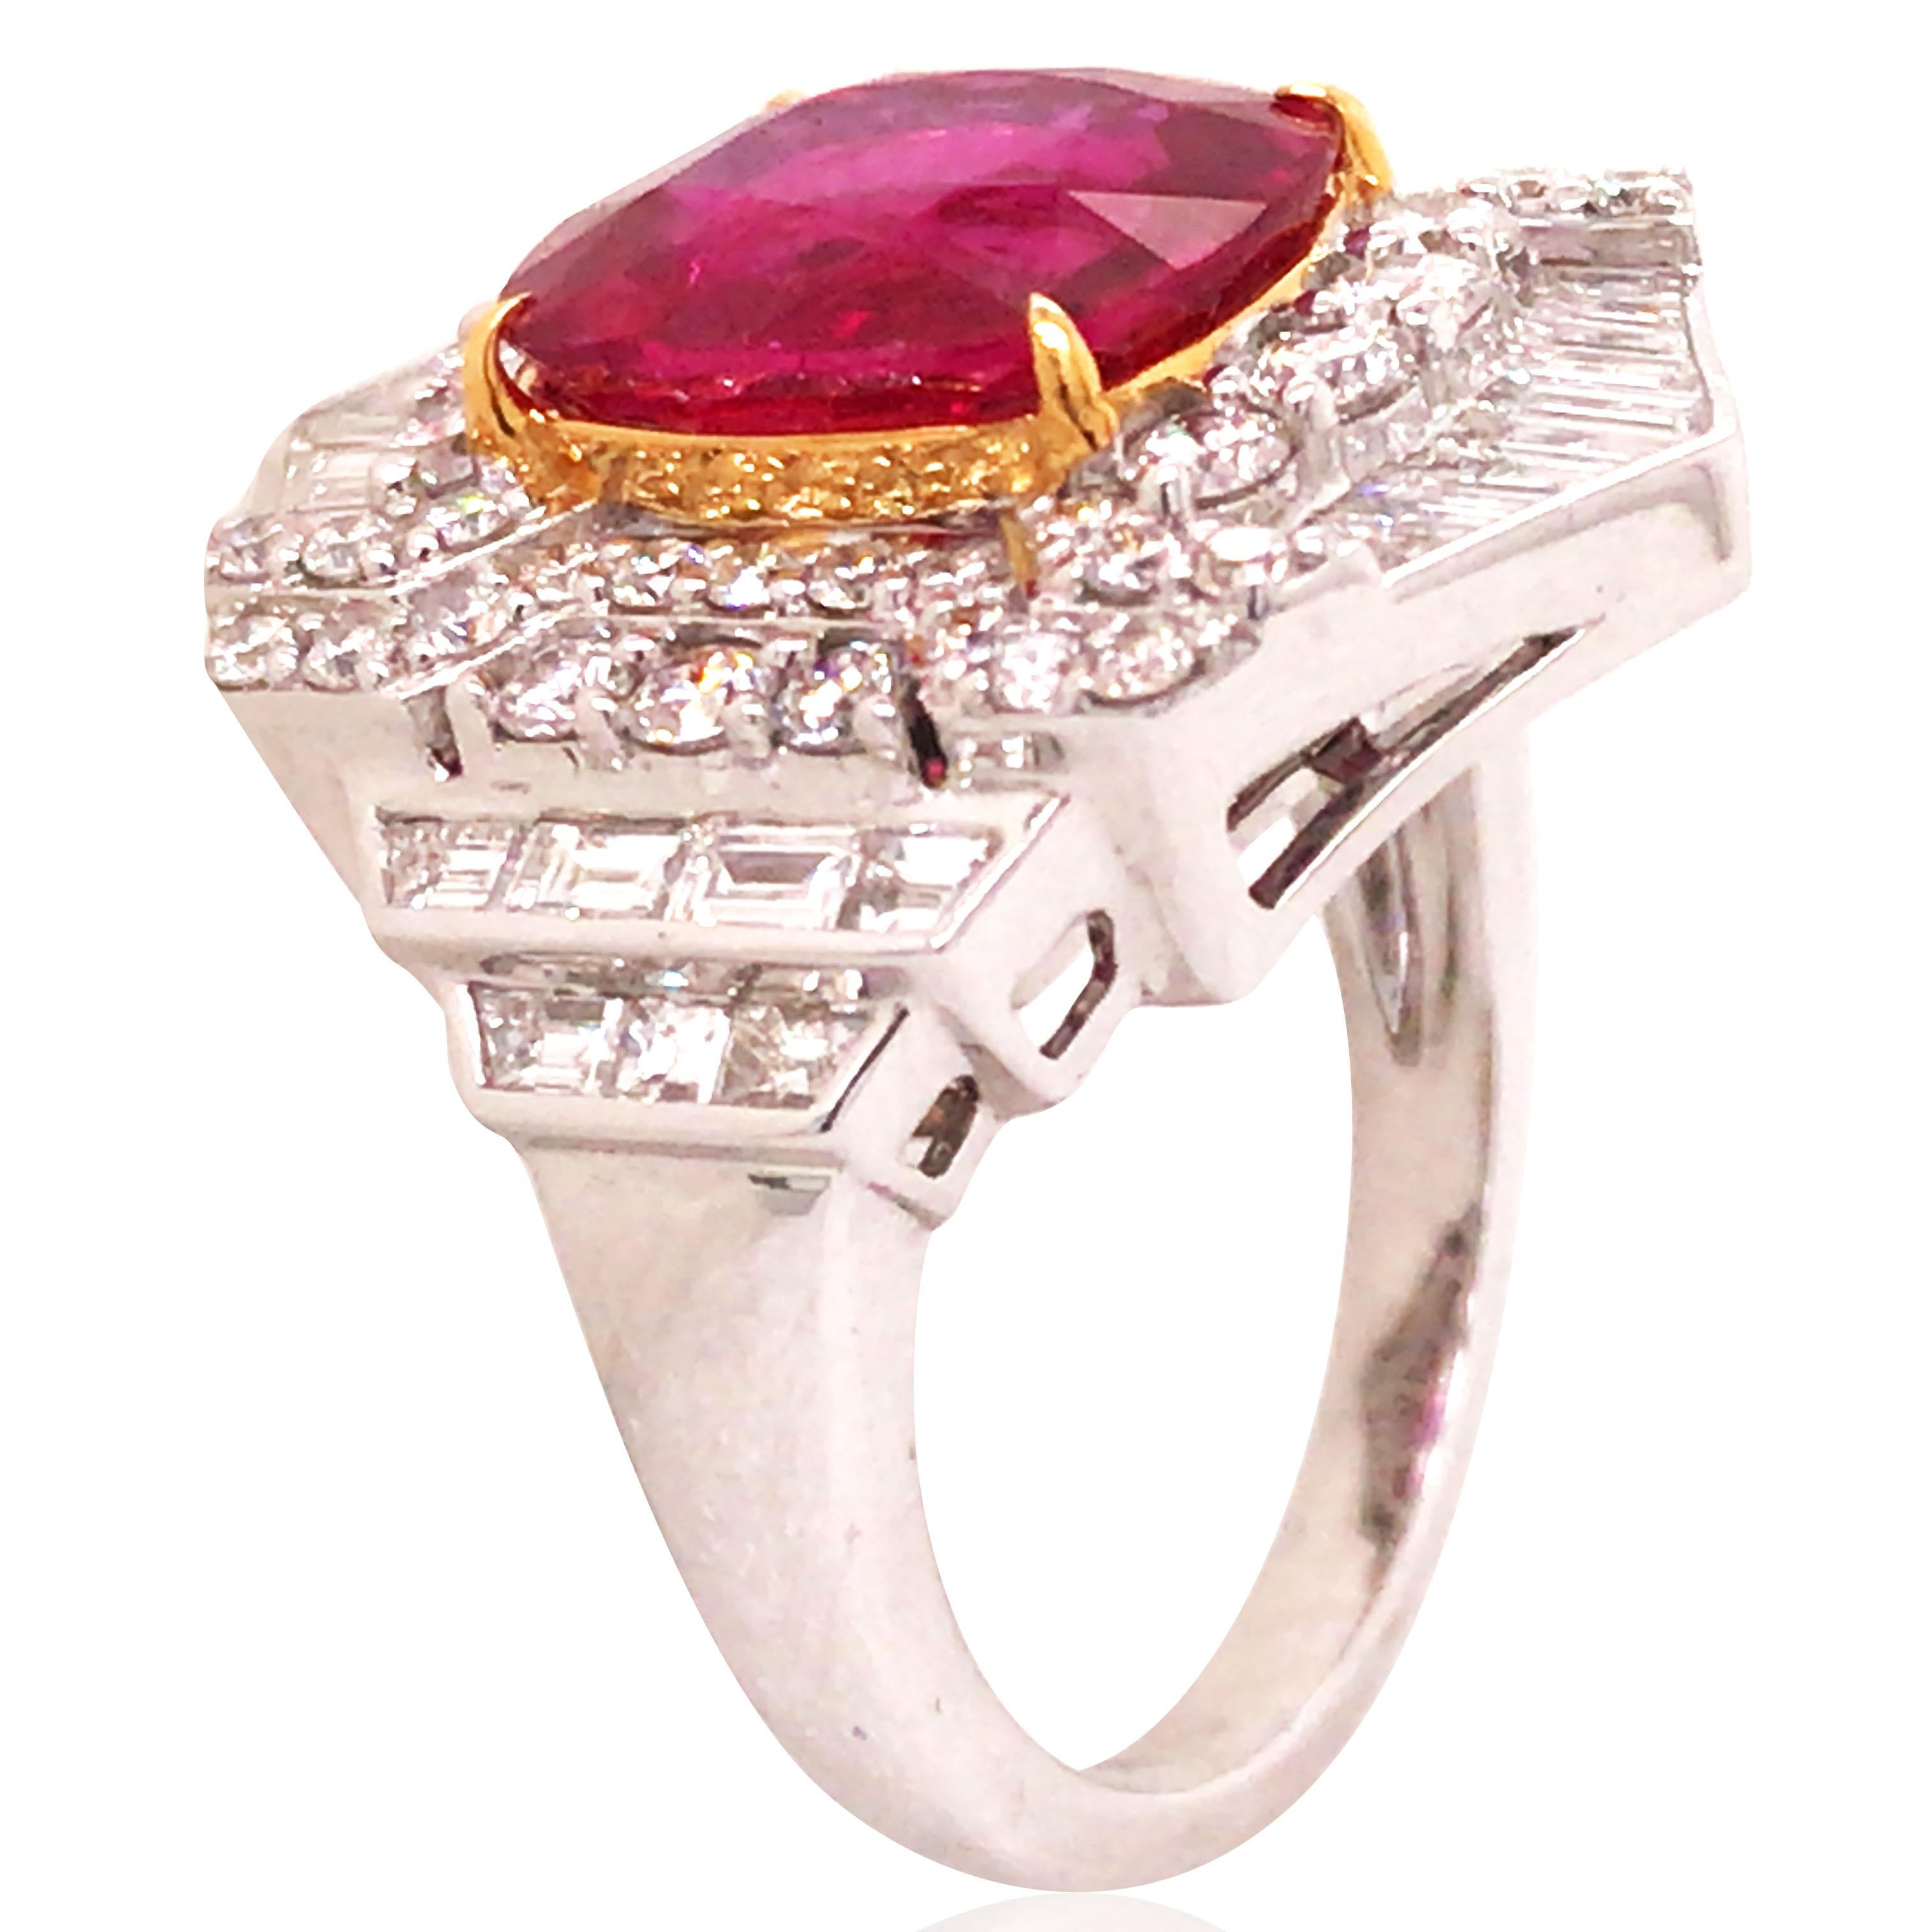 One cushion mixed cut ruby measuring 10.66 x 10.16 x 3.30mm, 4.23ct. 34 tapered baguette and 48 round brilliant-cut diamonds total approx. 1.55ct. Ring size: 6.5. Accompanied by an AGL certificate stating that the ruby is of Burma origin with no